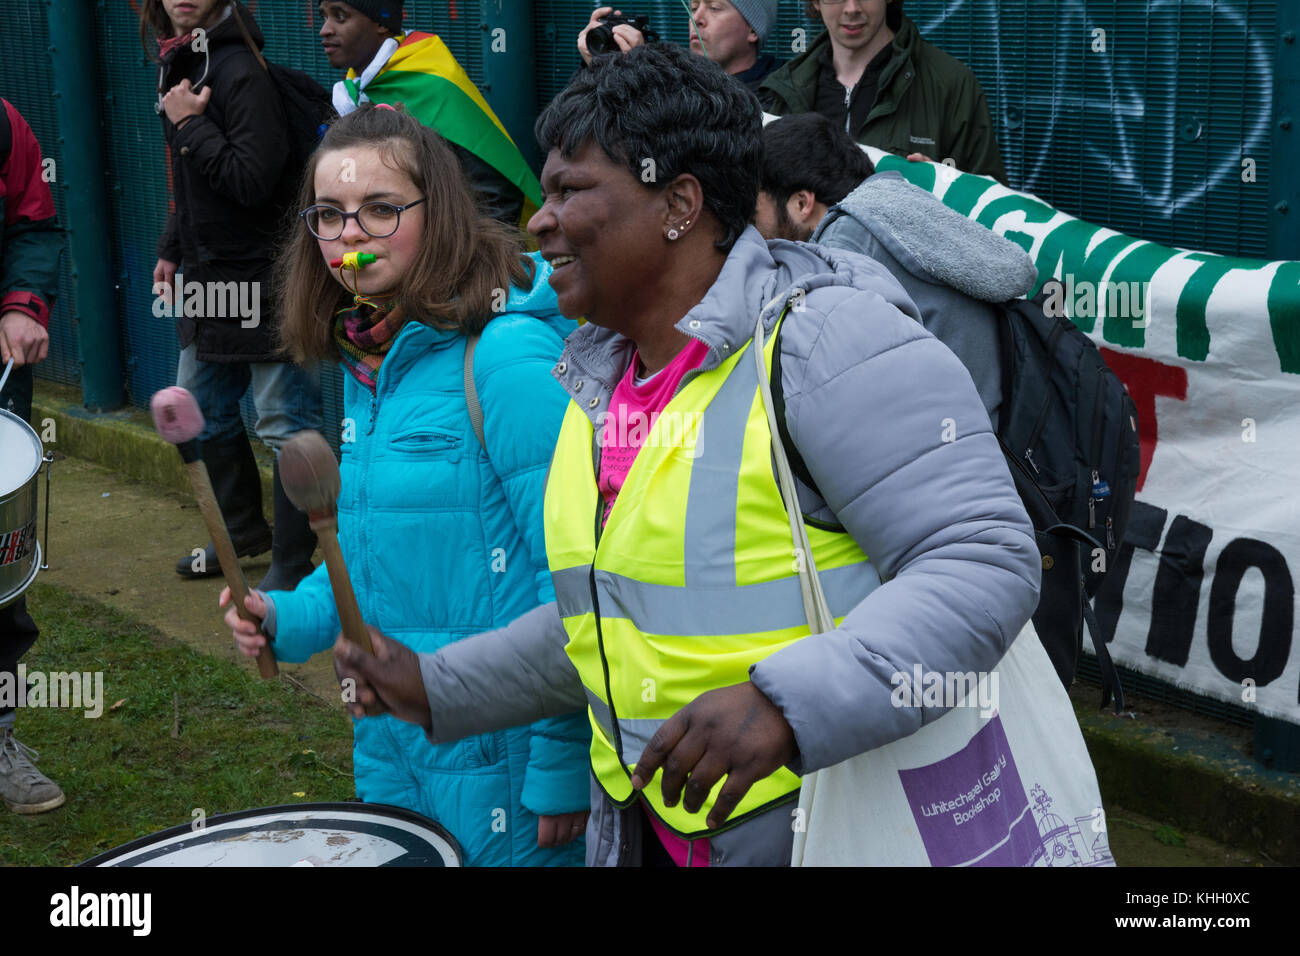 Milton Ernest, Bedford, UK. Saturday 18th November 2017.  Around 1000 protesters attended a Shut Down Yarl’s Wood protest at the immigration removal centre. The protest was organised by the Movement for Justice by Any Means. Credit: Steve Bell/Alamy Live News Stock Photo